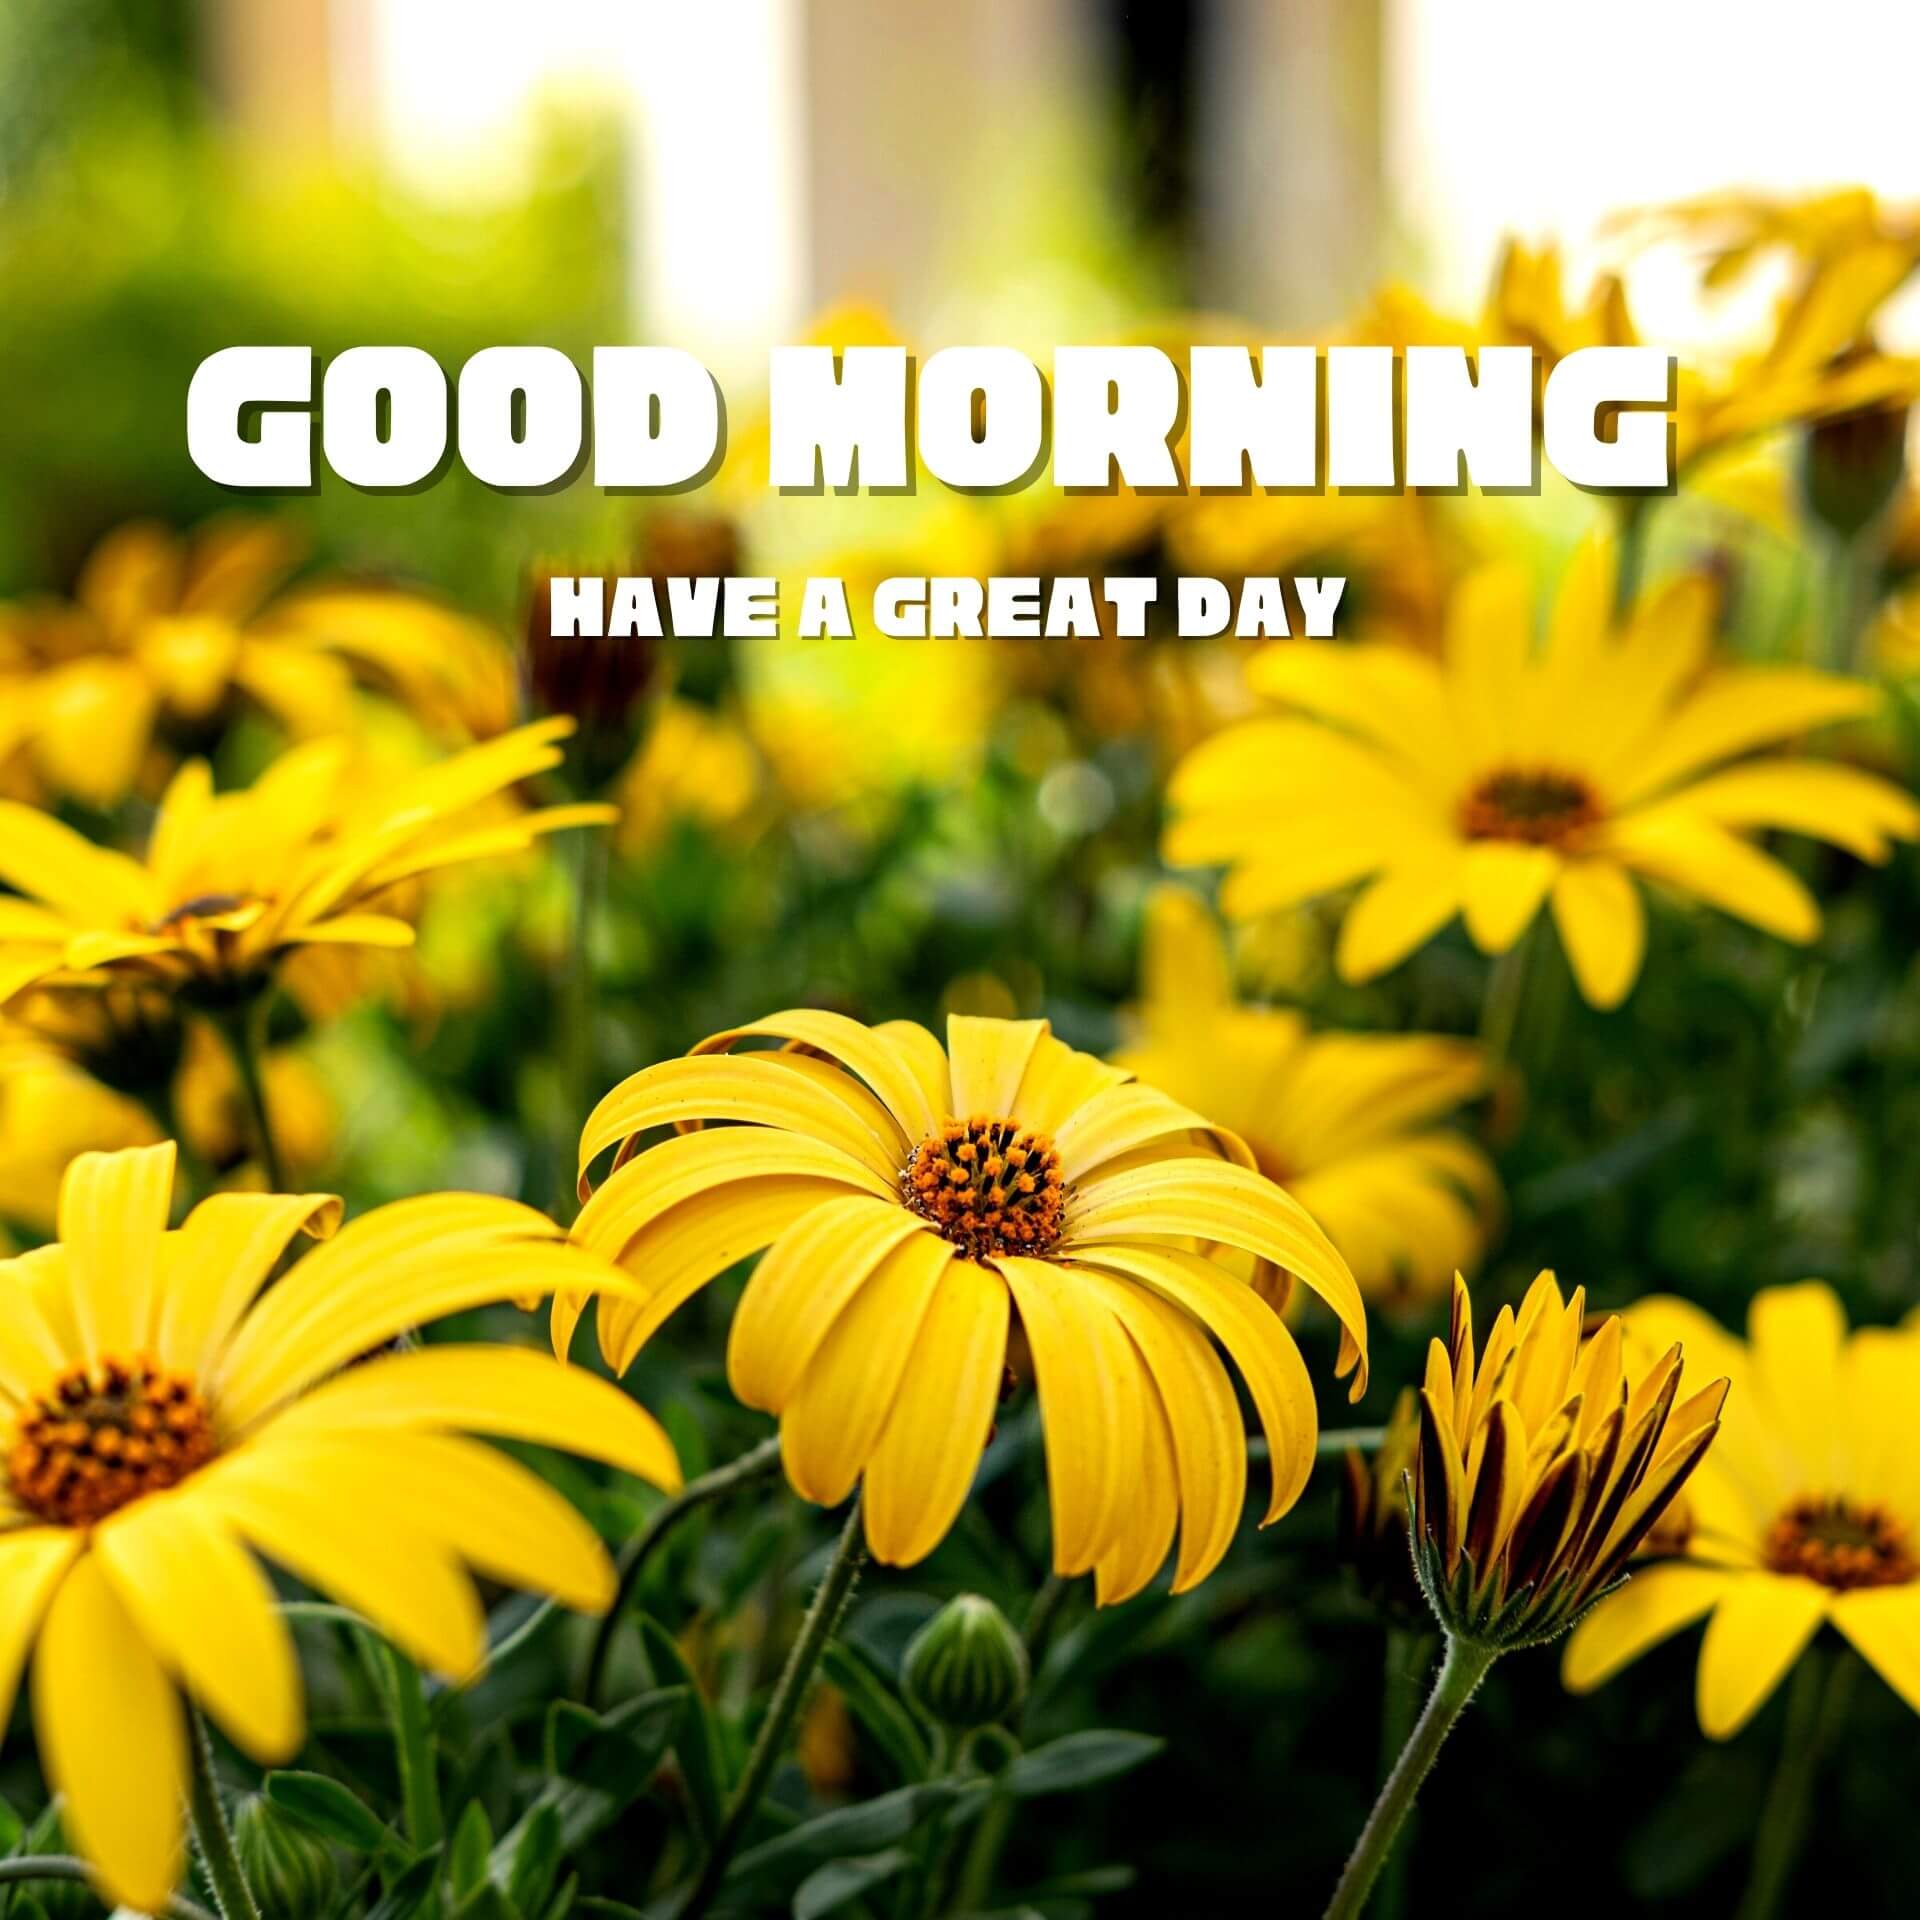 Good morning have a nice day Wallpaper HD Download